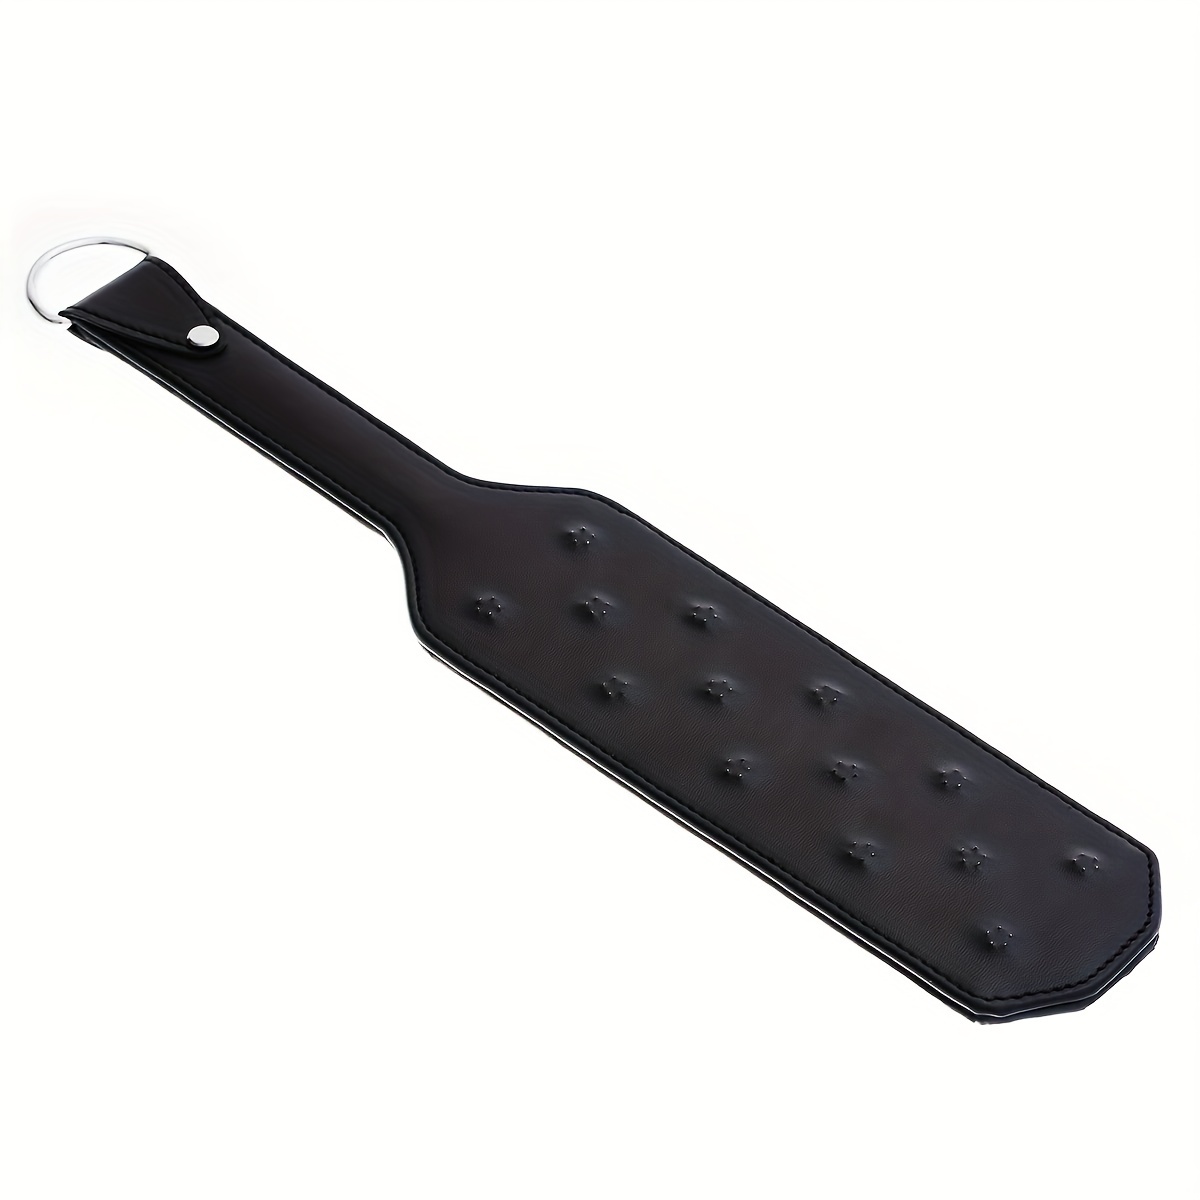 Studded Spanking Paddles BDSM Sex Toy Faux Leather Slapper For Sex